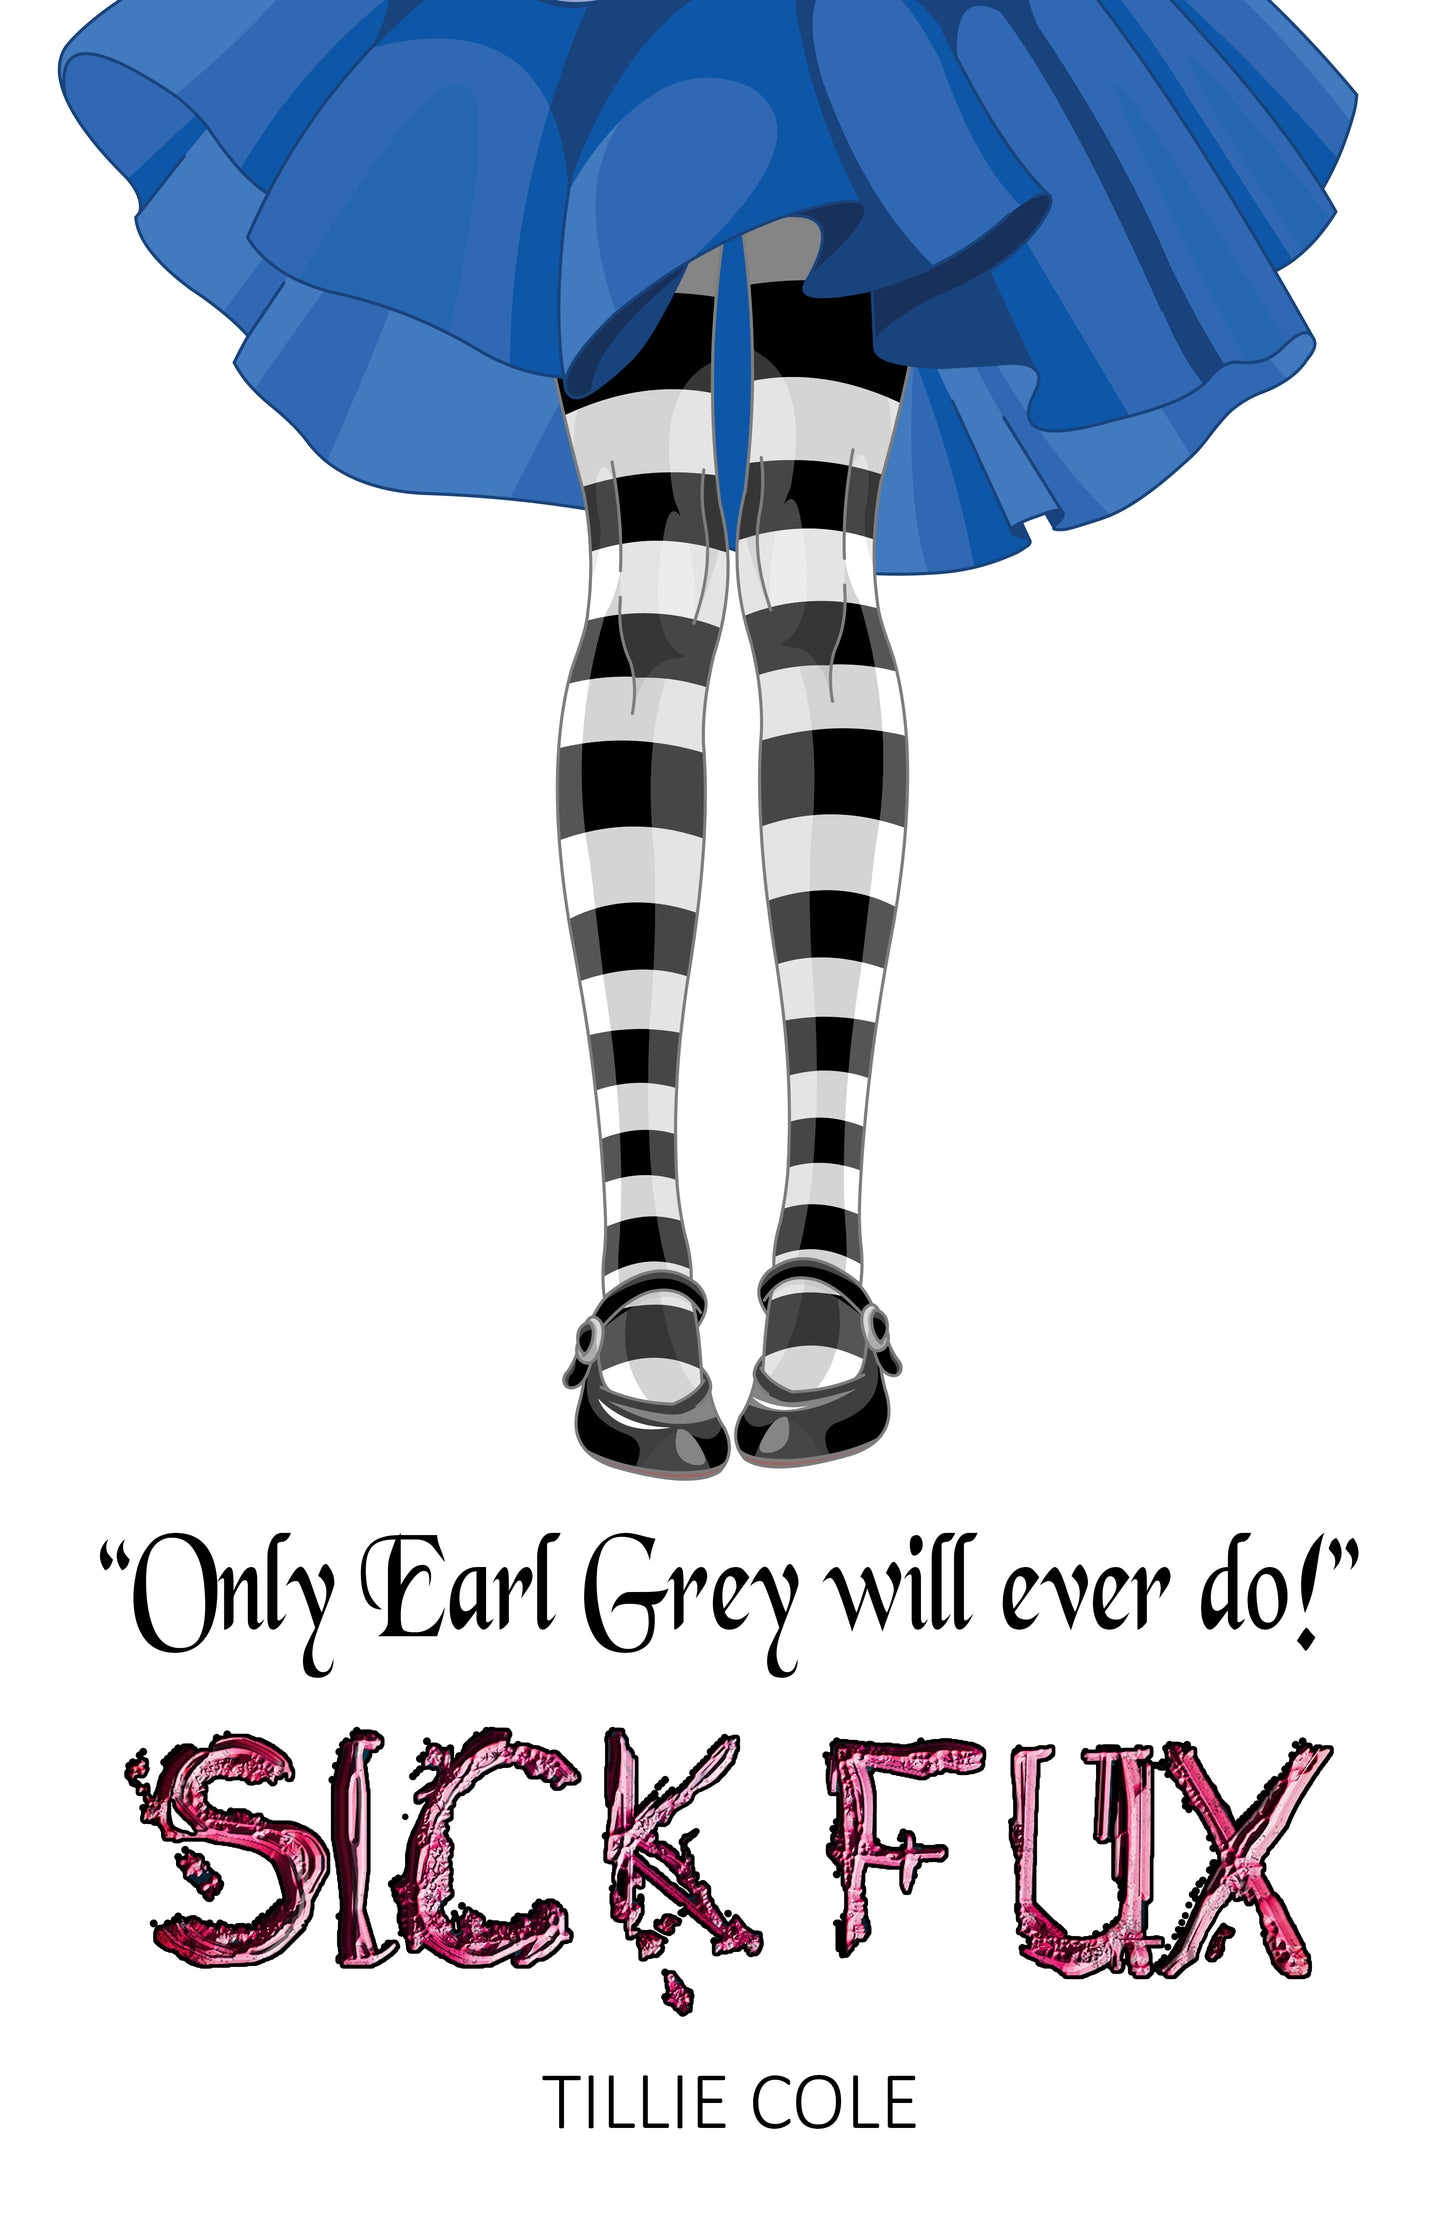 Sick Fux "Only earl grey will ever do!" Poster